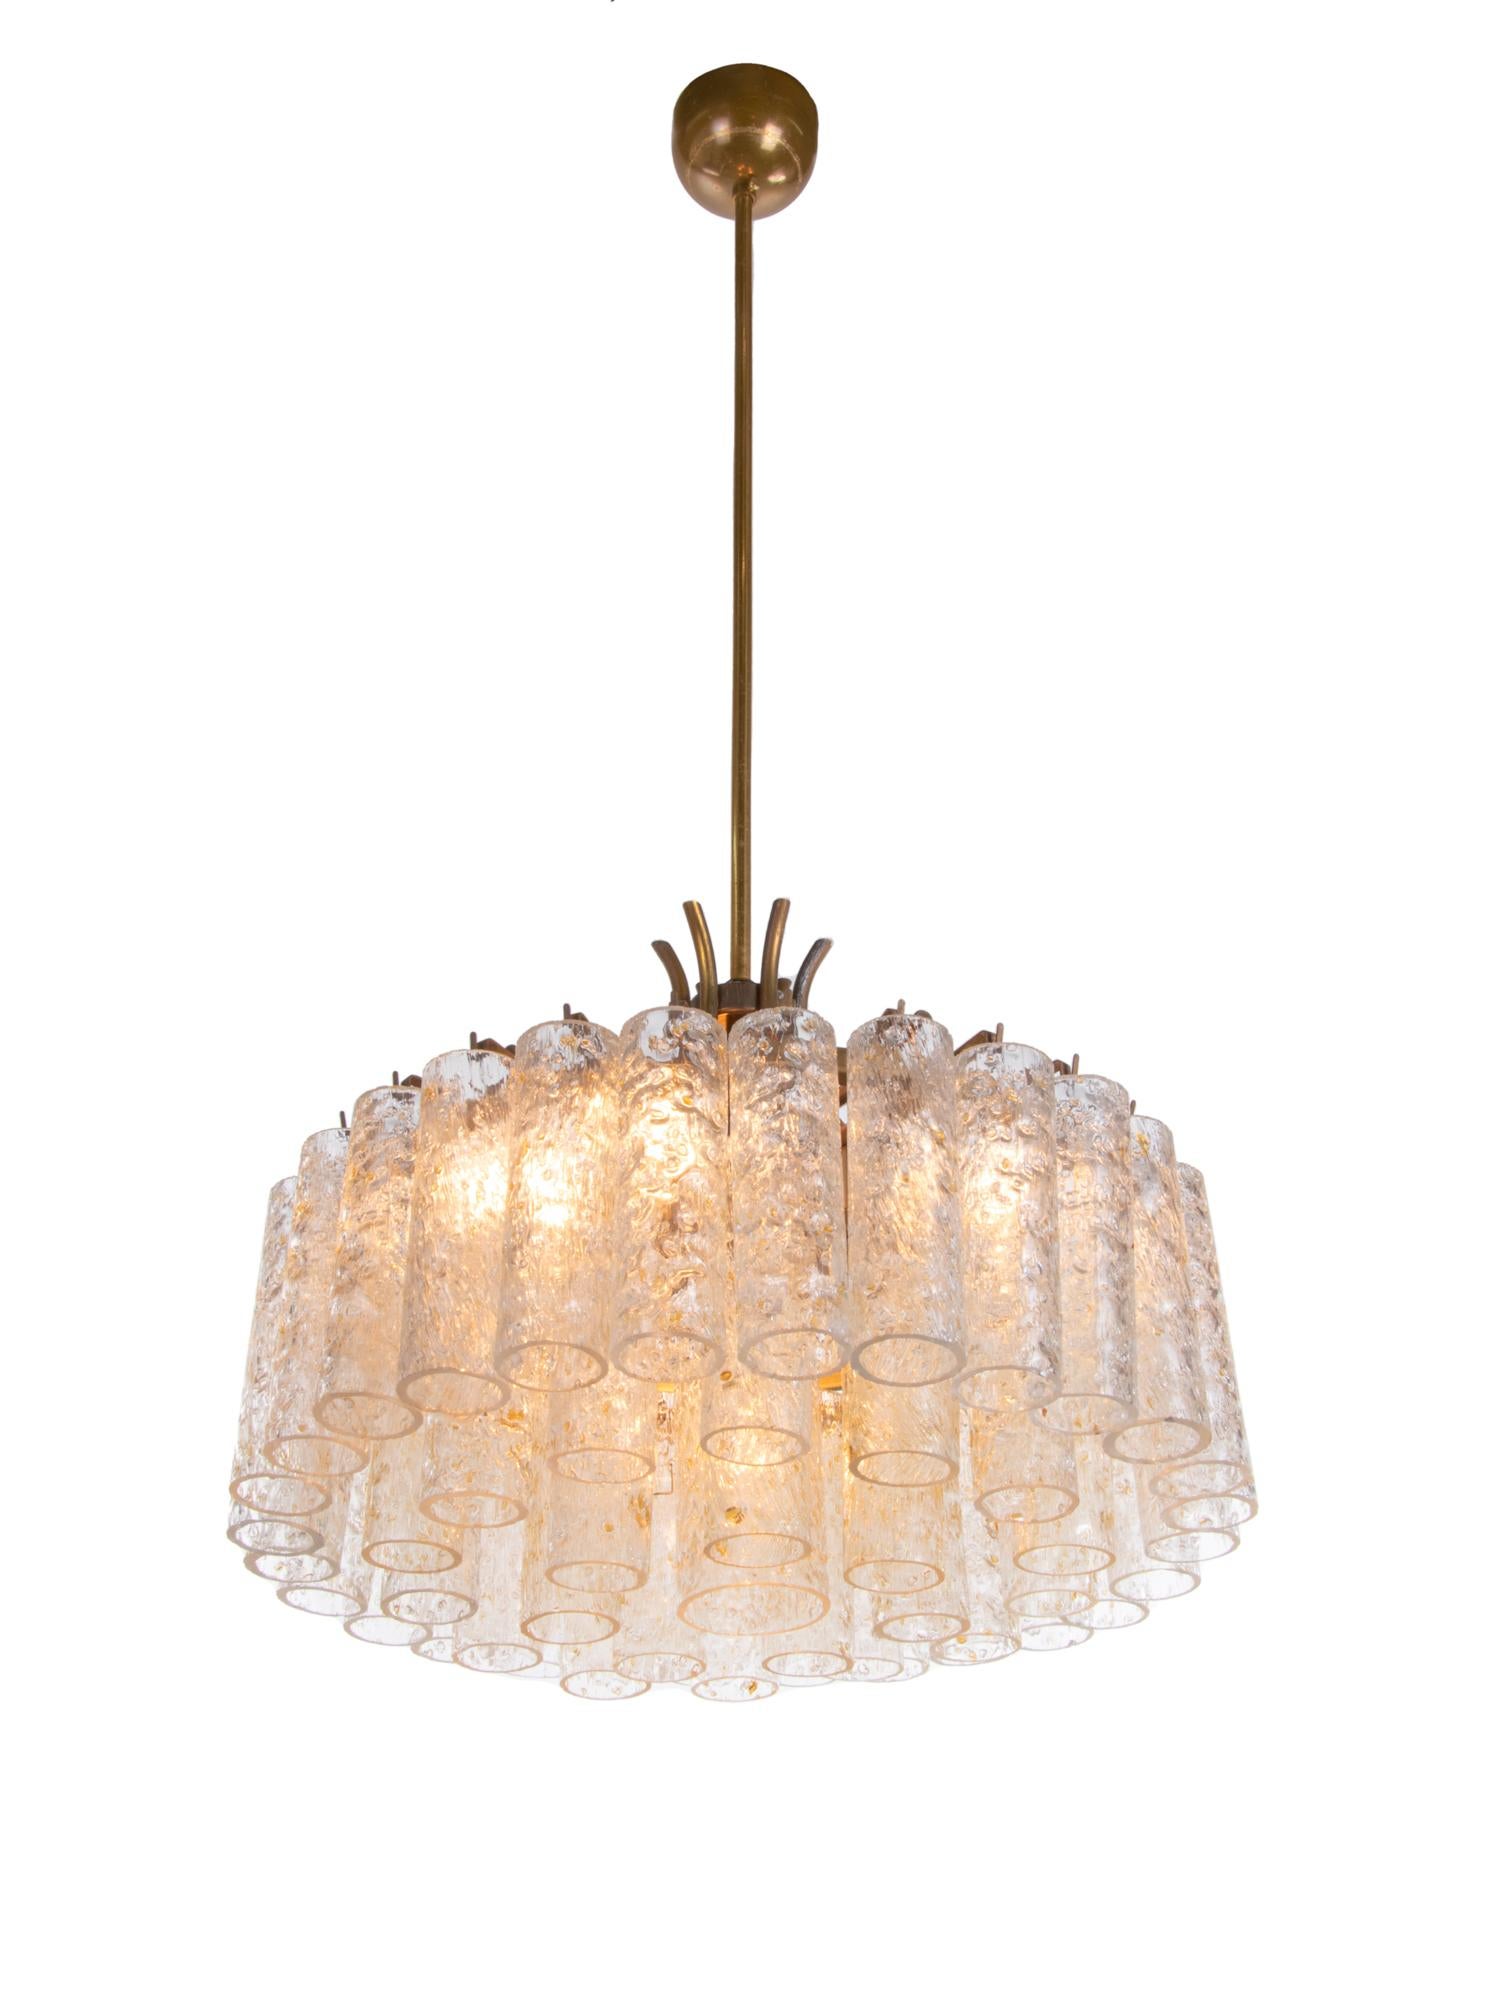 Mid-20th Century Chandelier with Gold Flaked Murano Glass Tubes & Brass by Doria, Germany, 1960s For Sale